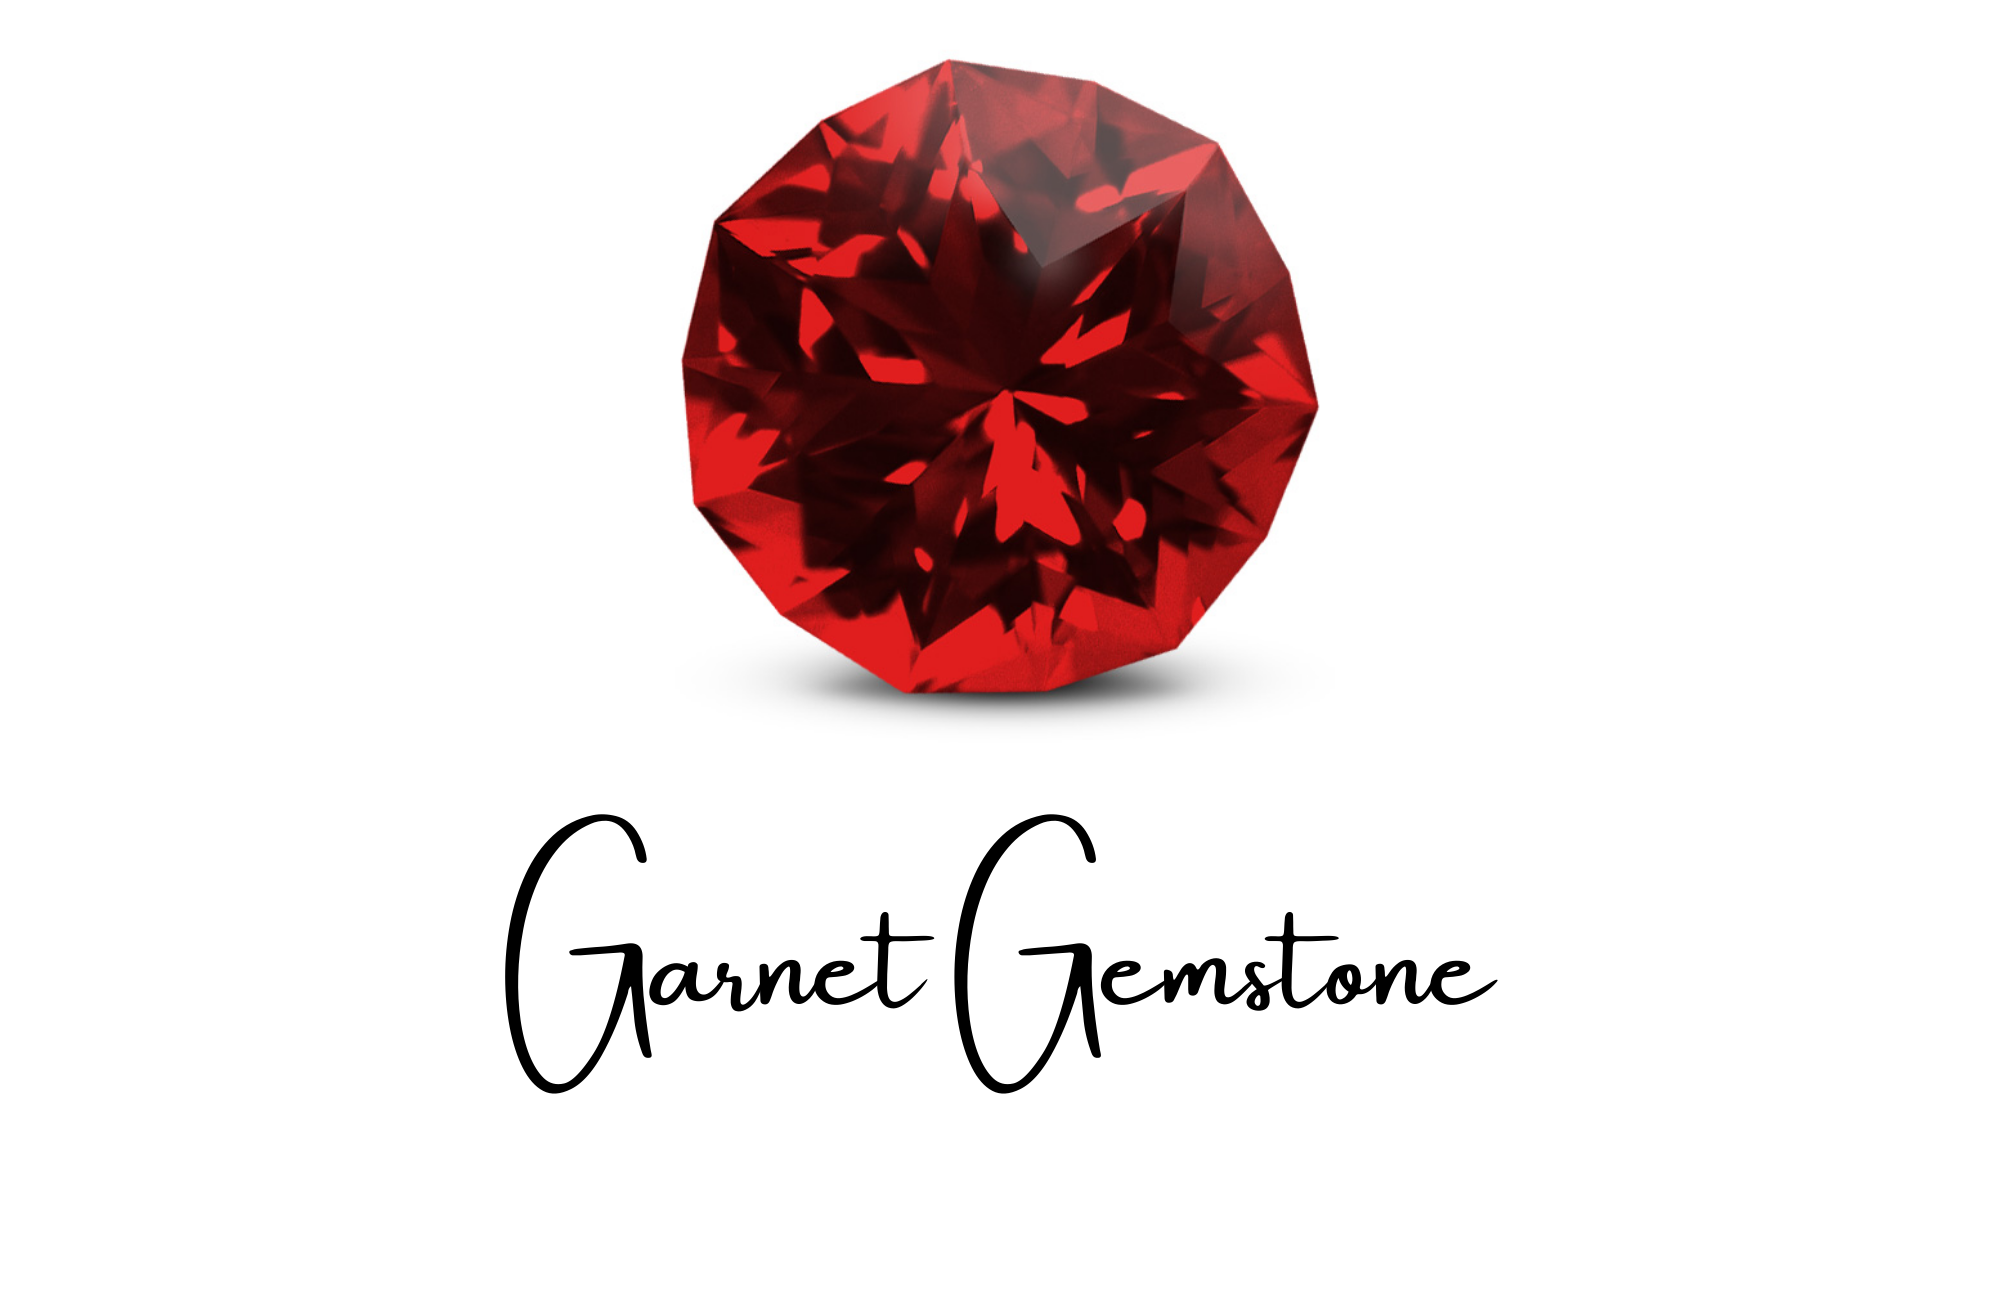 A tetradecahedron red garnet